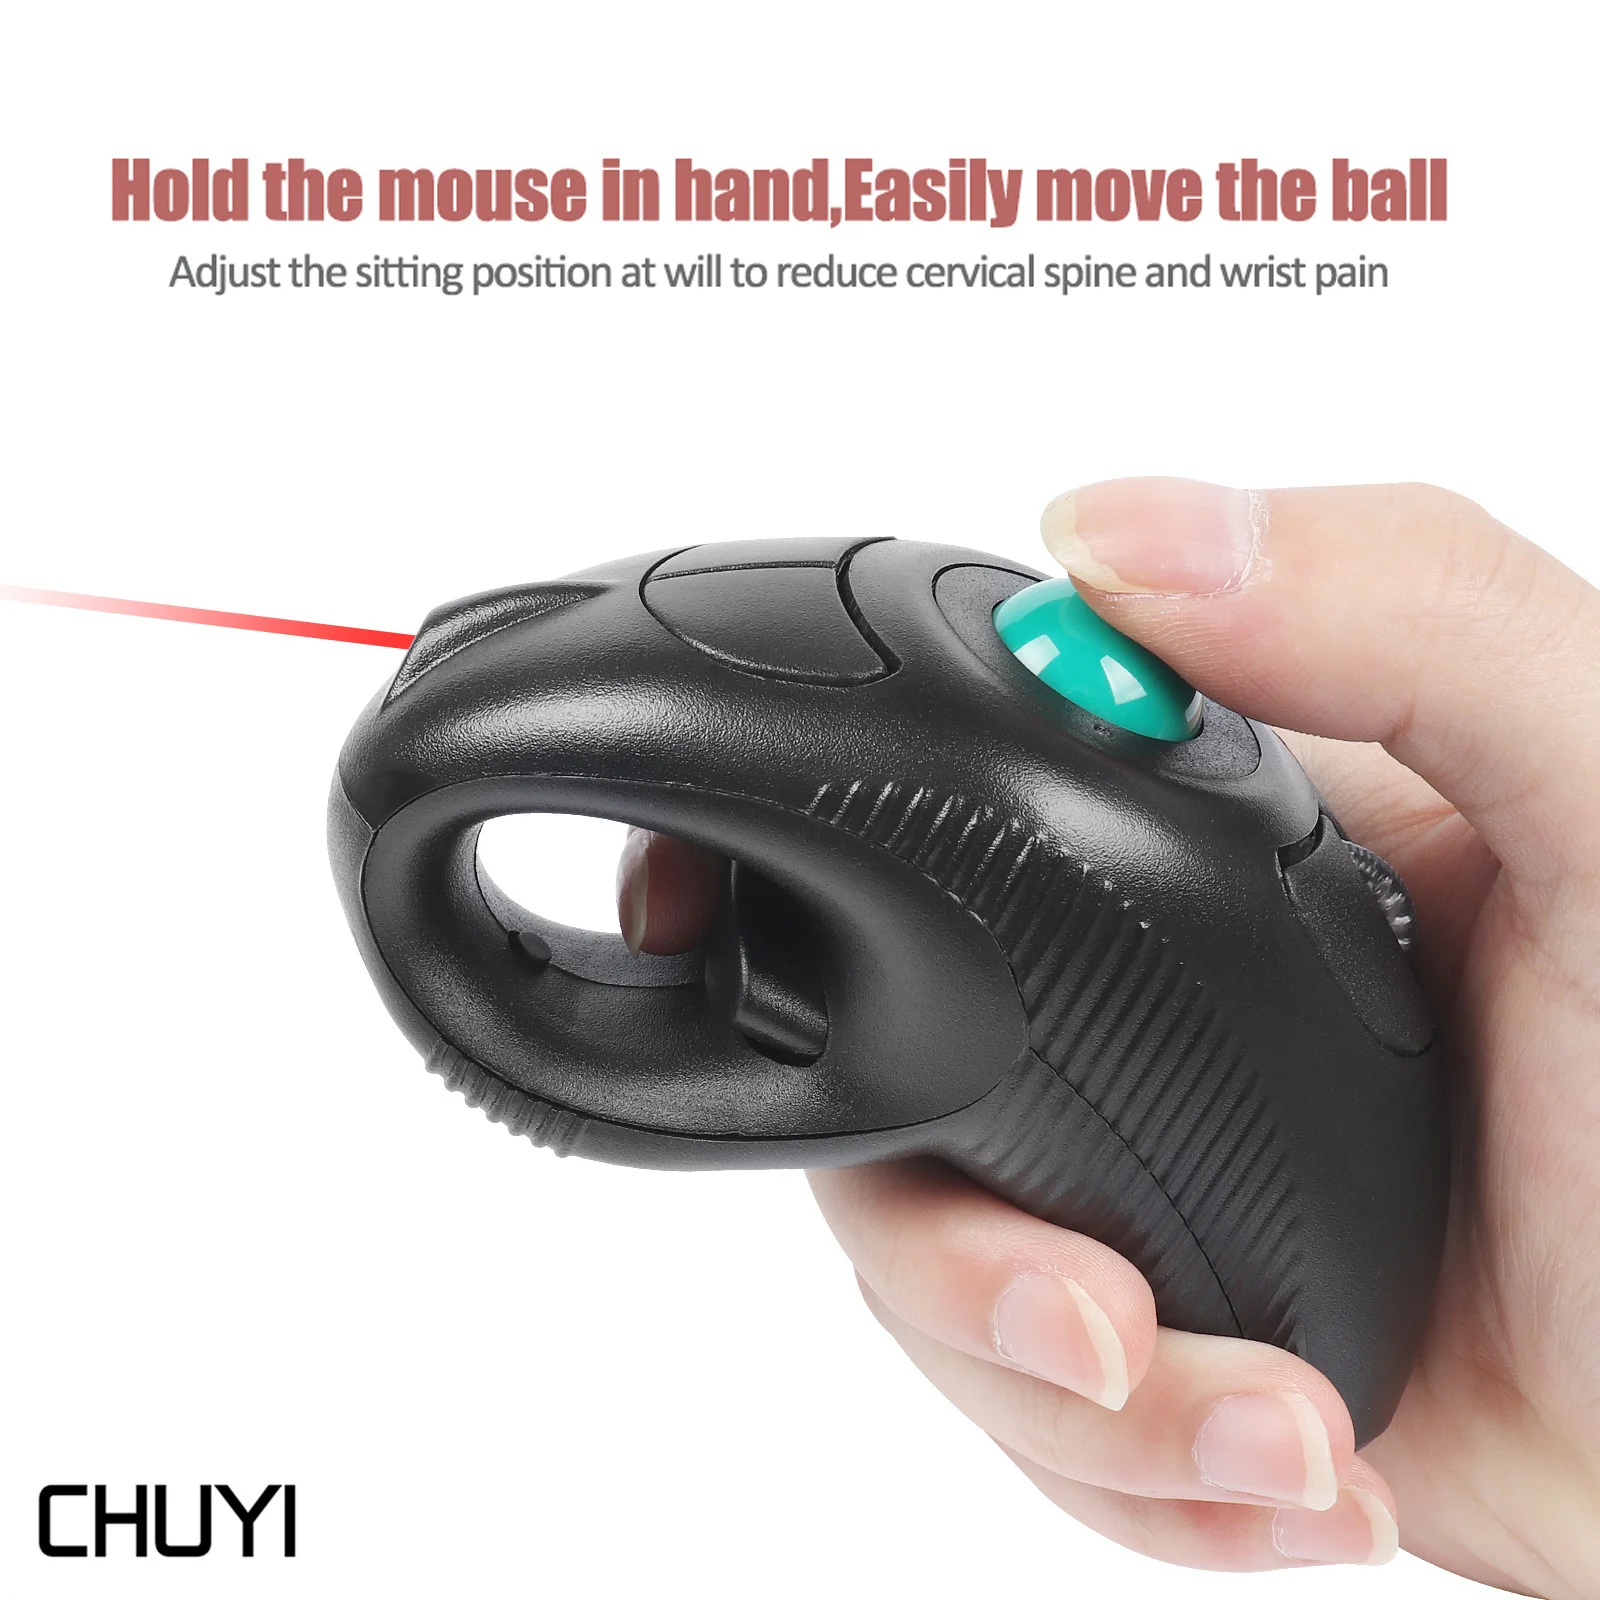 

CHUYI Wireless Trackball Mouse Vertical 2.4GHz Digital Thumb-Controlled Mause 10M Handheld 1600 DPI Track Ball Optical Mice